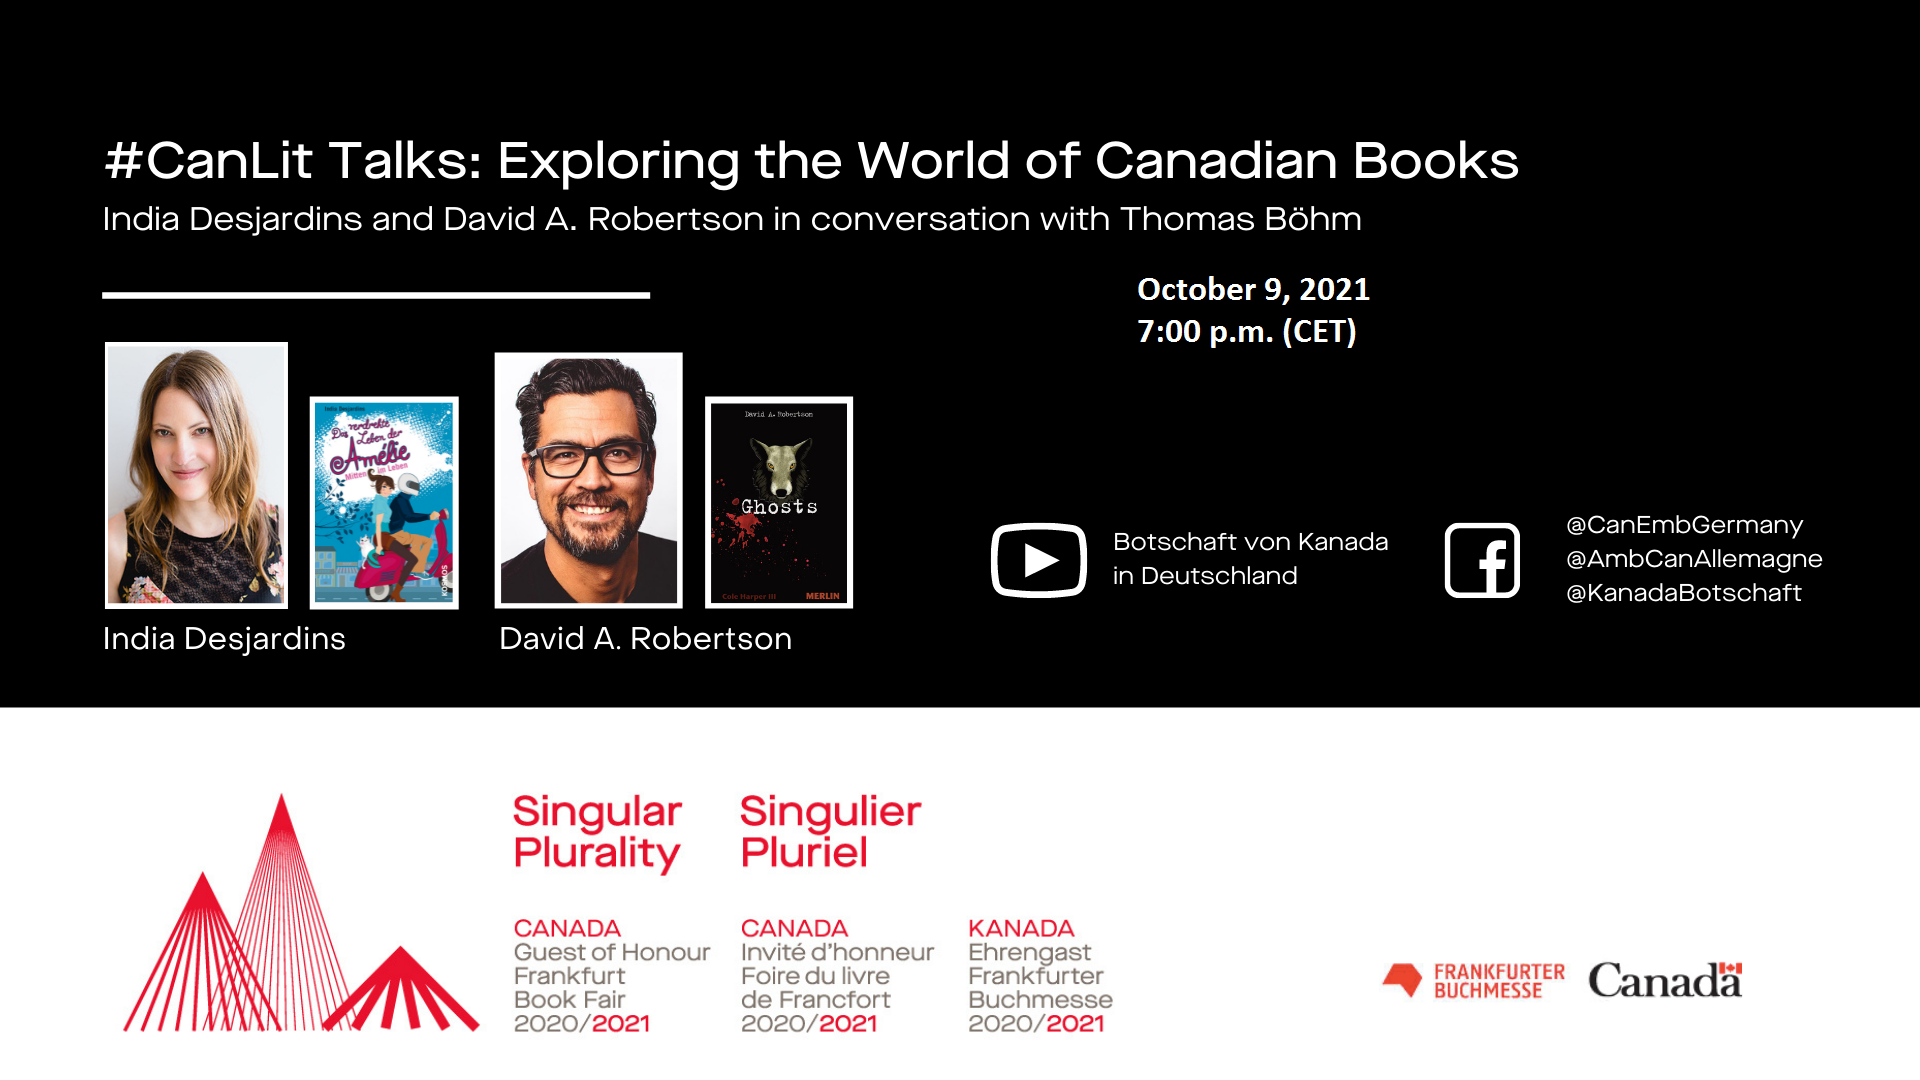 #CanLit Talks: Exploring the World of Canadian Books